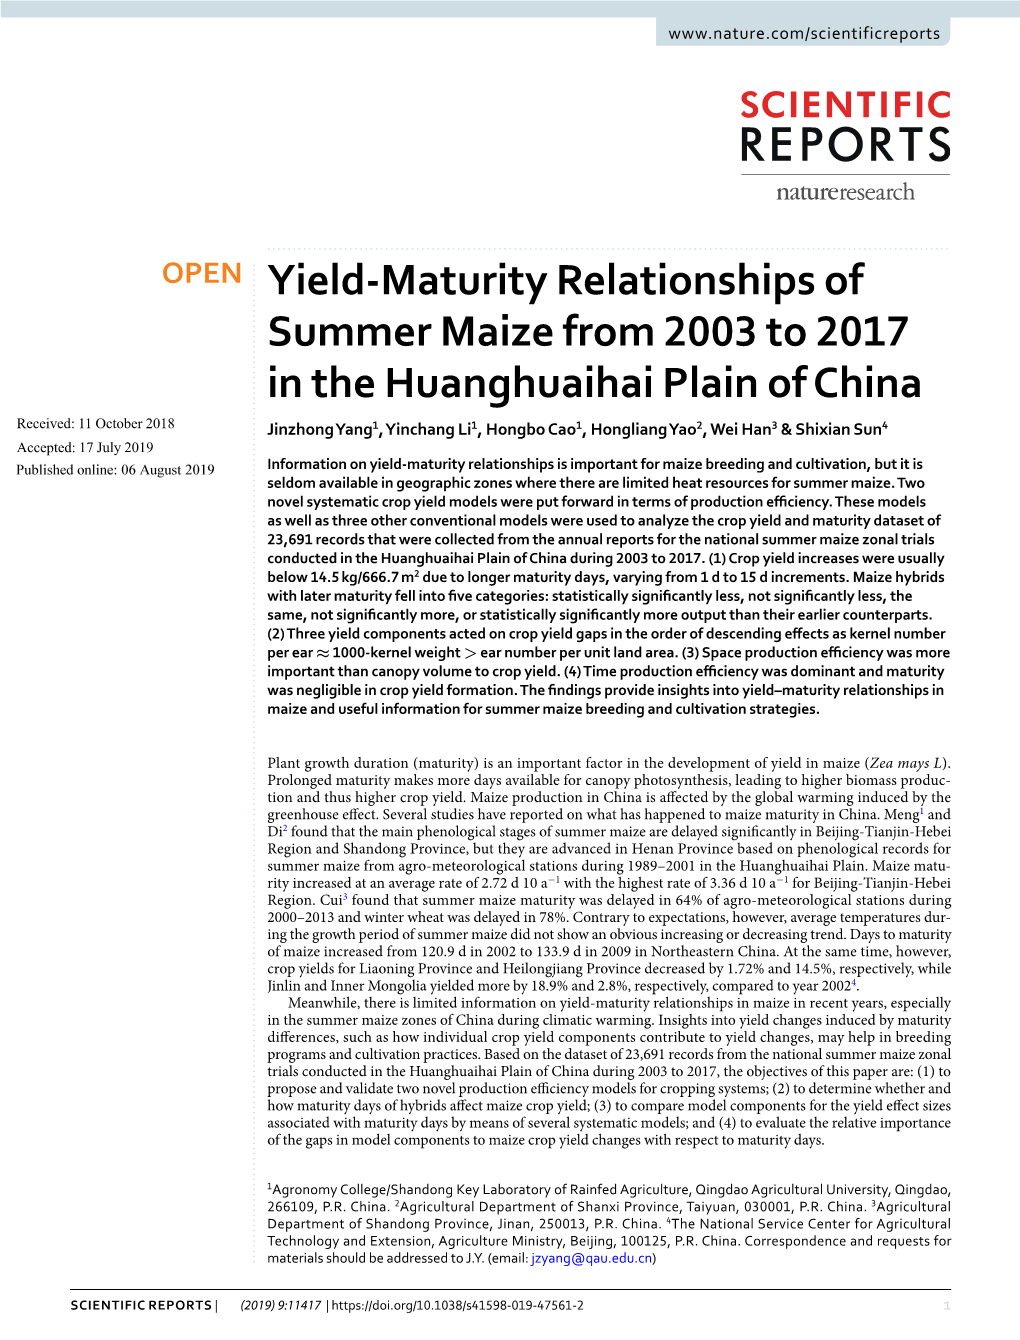 Yield-Maturity Relationships of Summer Maize from 2003 to 2017